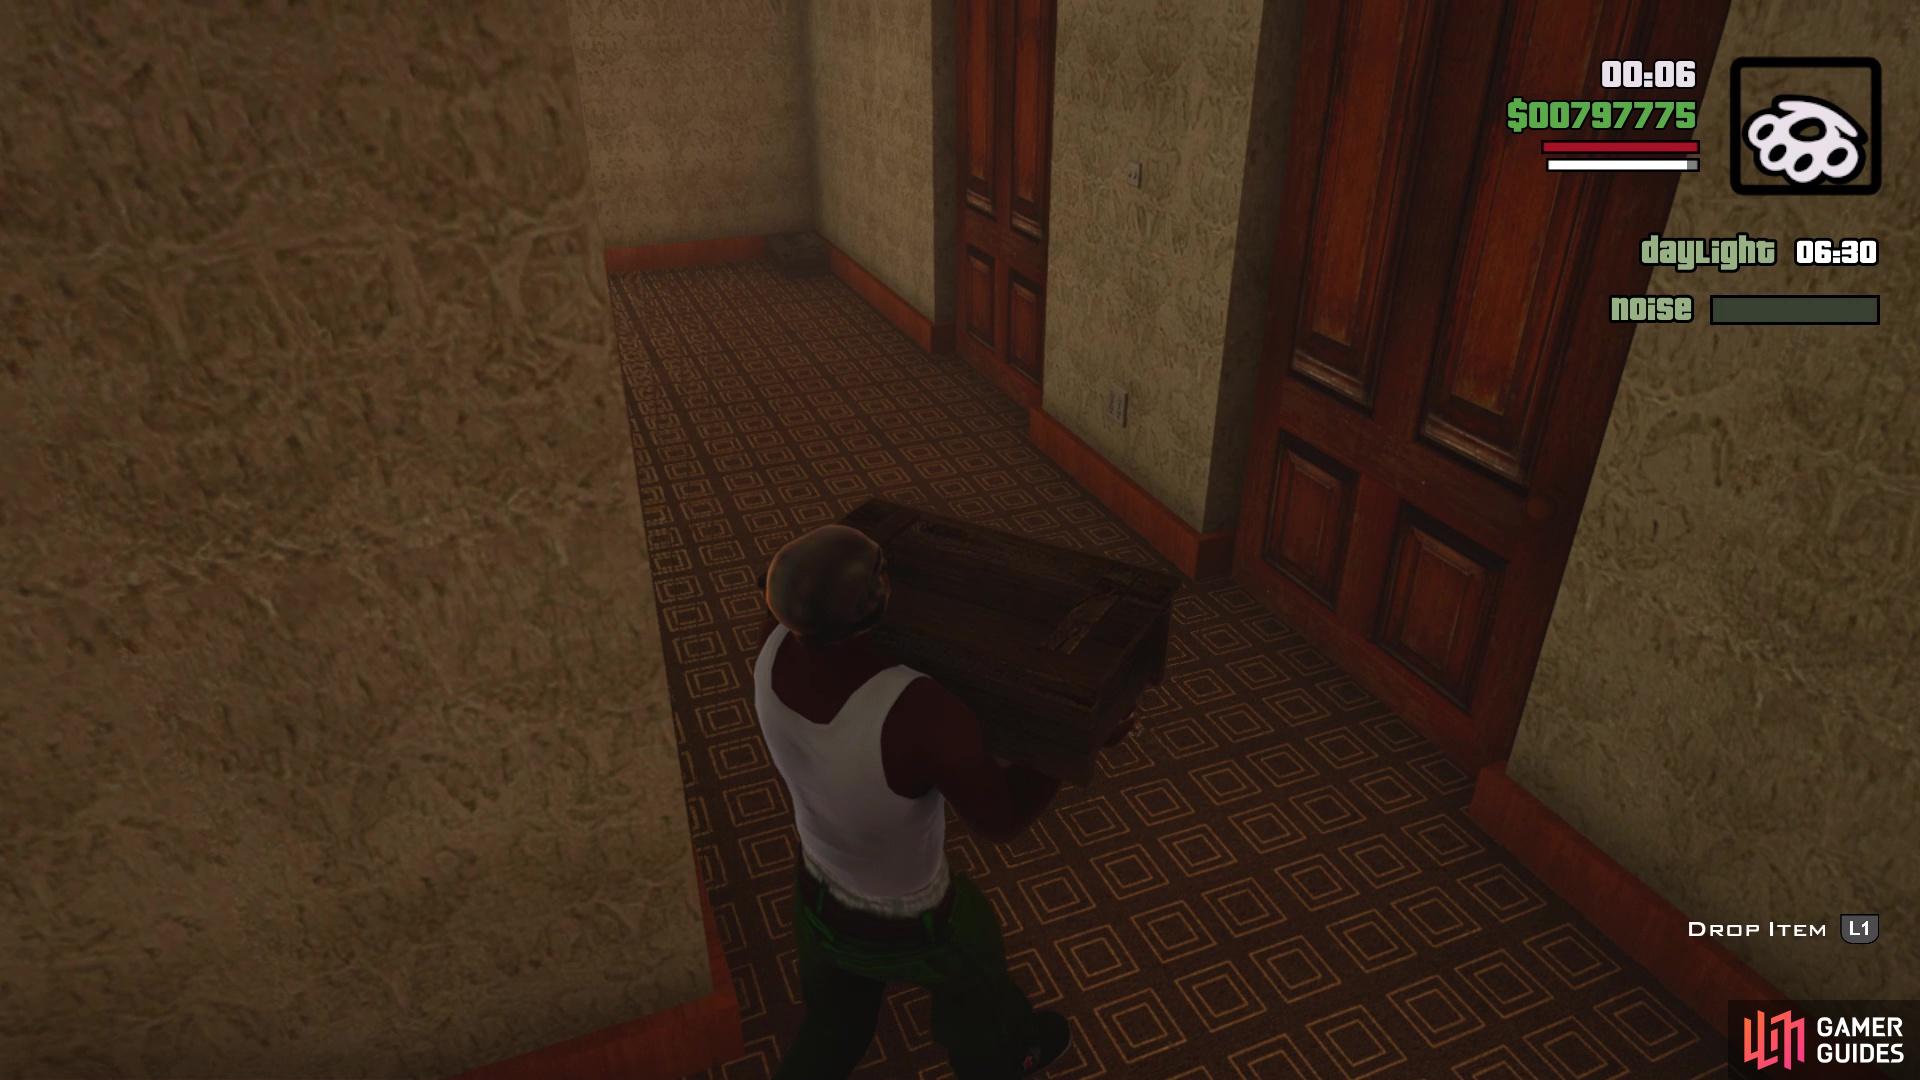 You cannot crouch while holding a crate